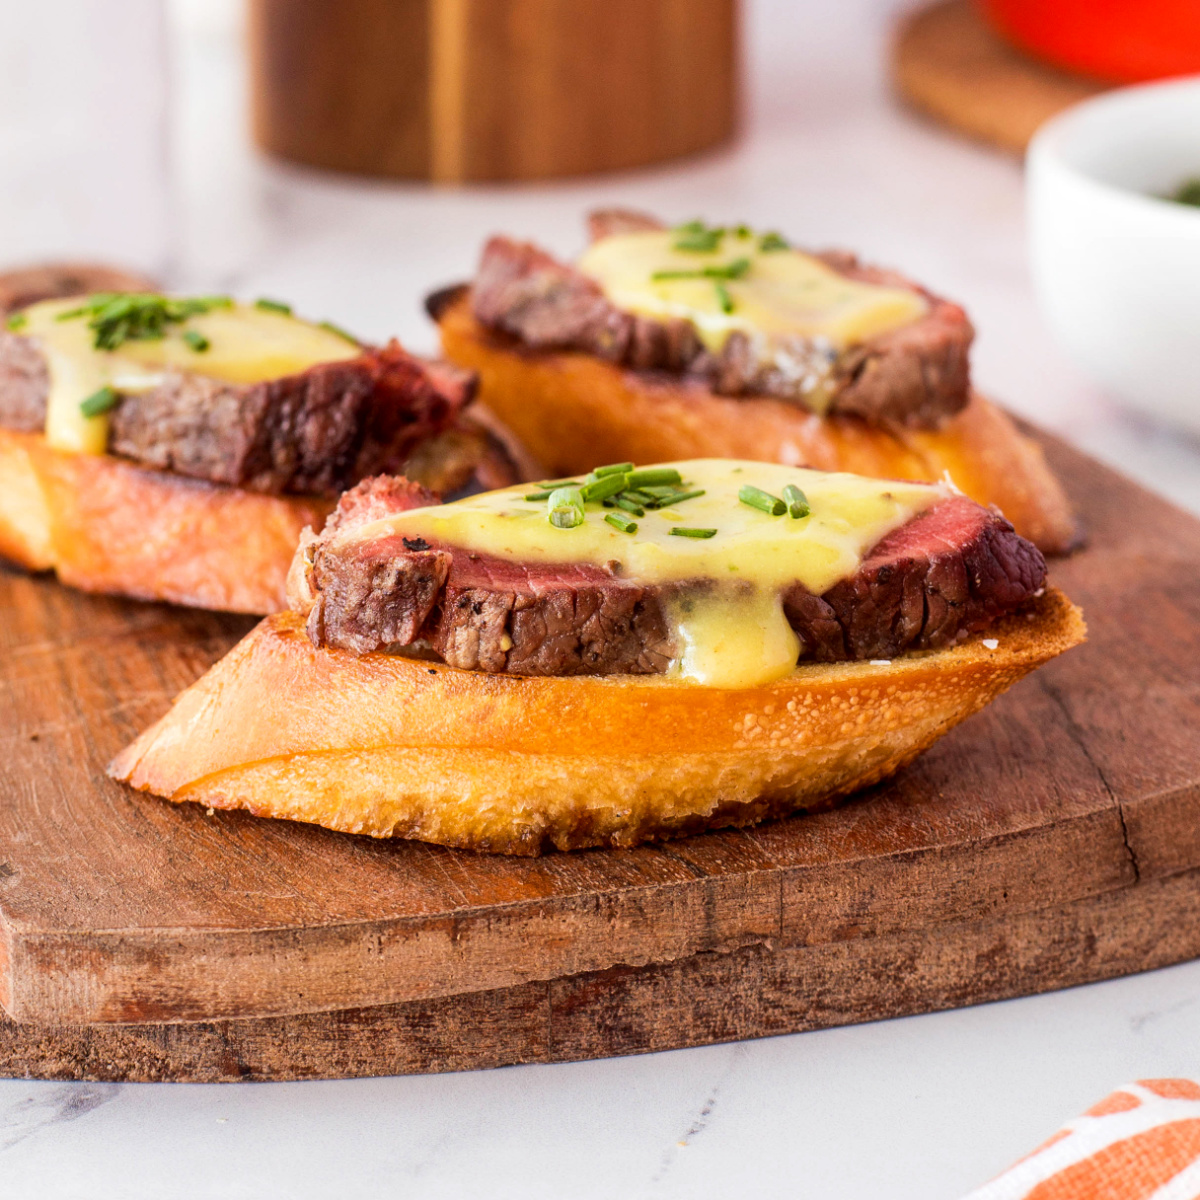 Grilled beef tenderloin crostini with béarnaise sauce and chives on a wooden board